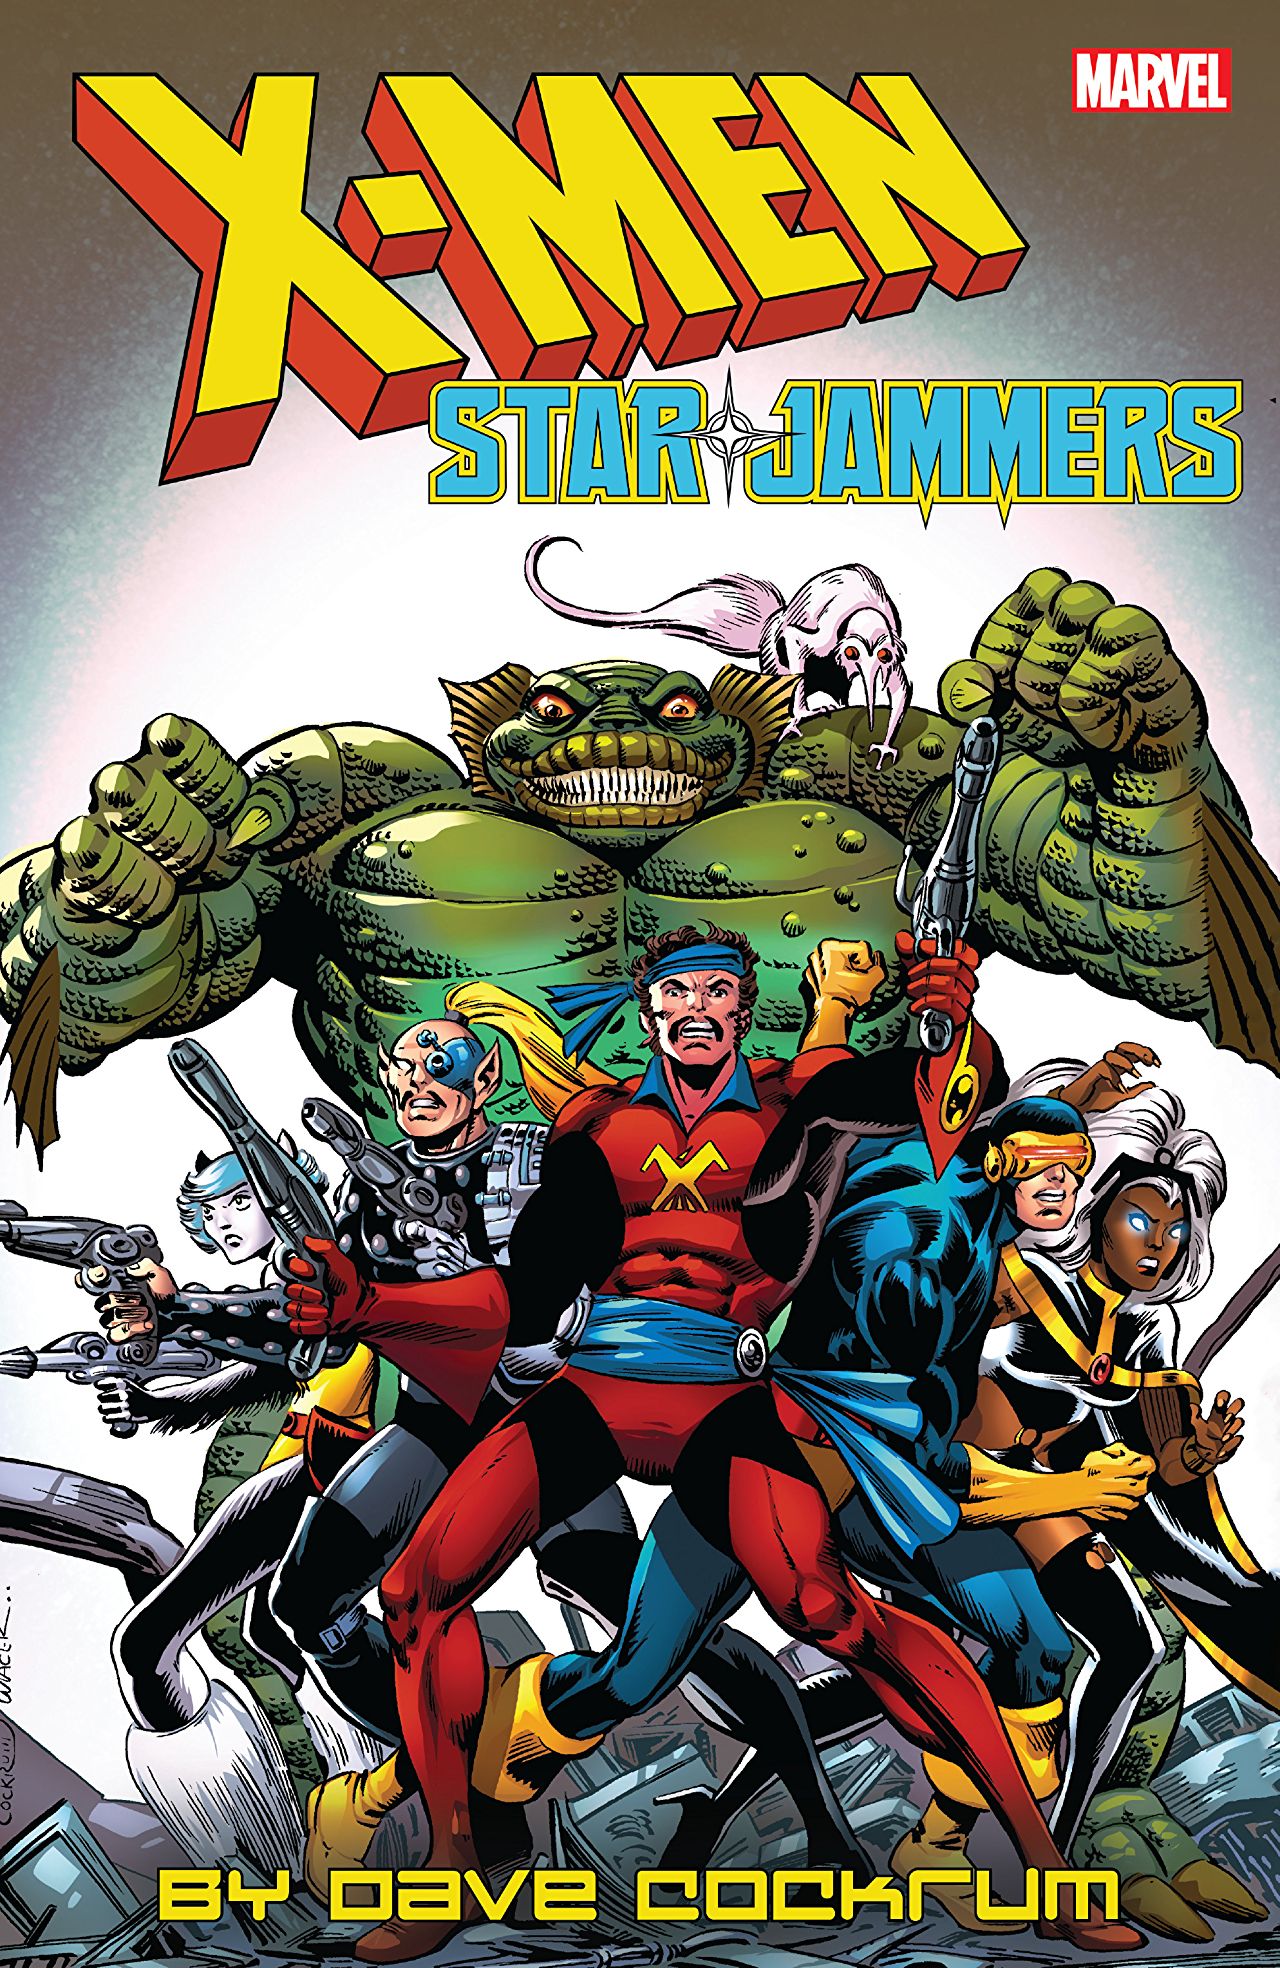 X-Men: Starjammers By Dave Cockrum review - Just in time for the Dawn of X